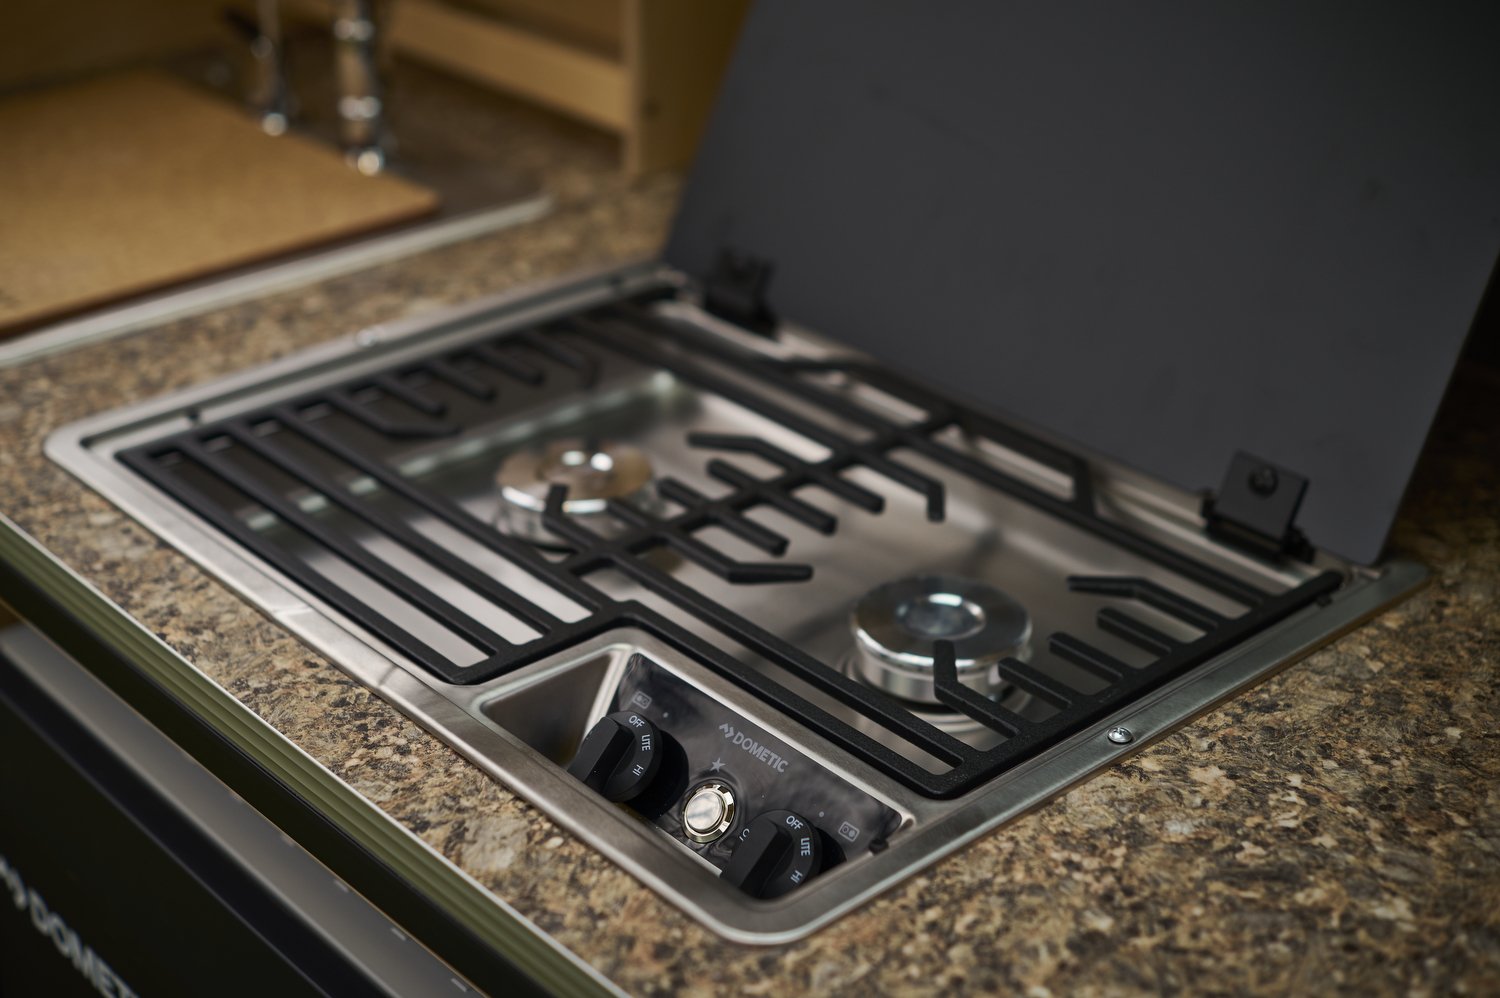 Two Burner drop-in cooktop w/ glass cover